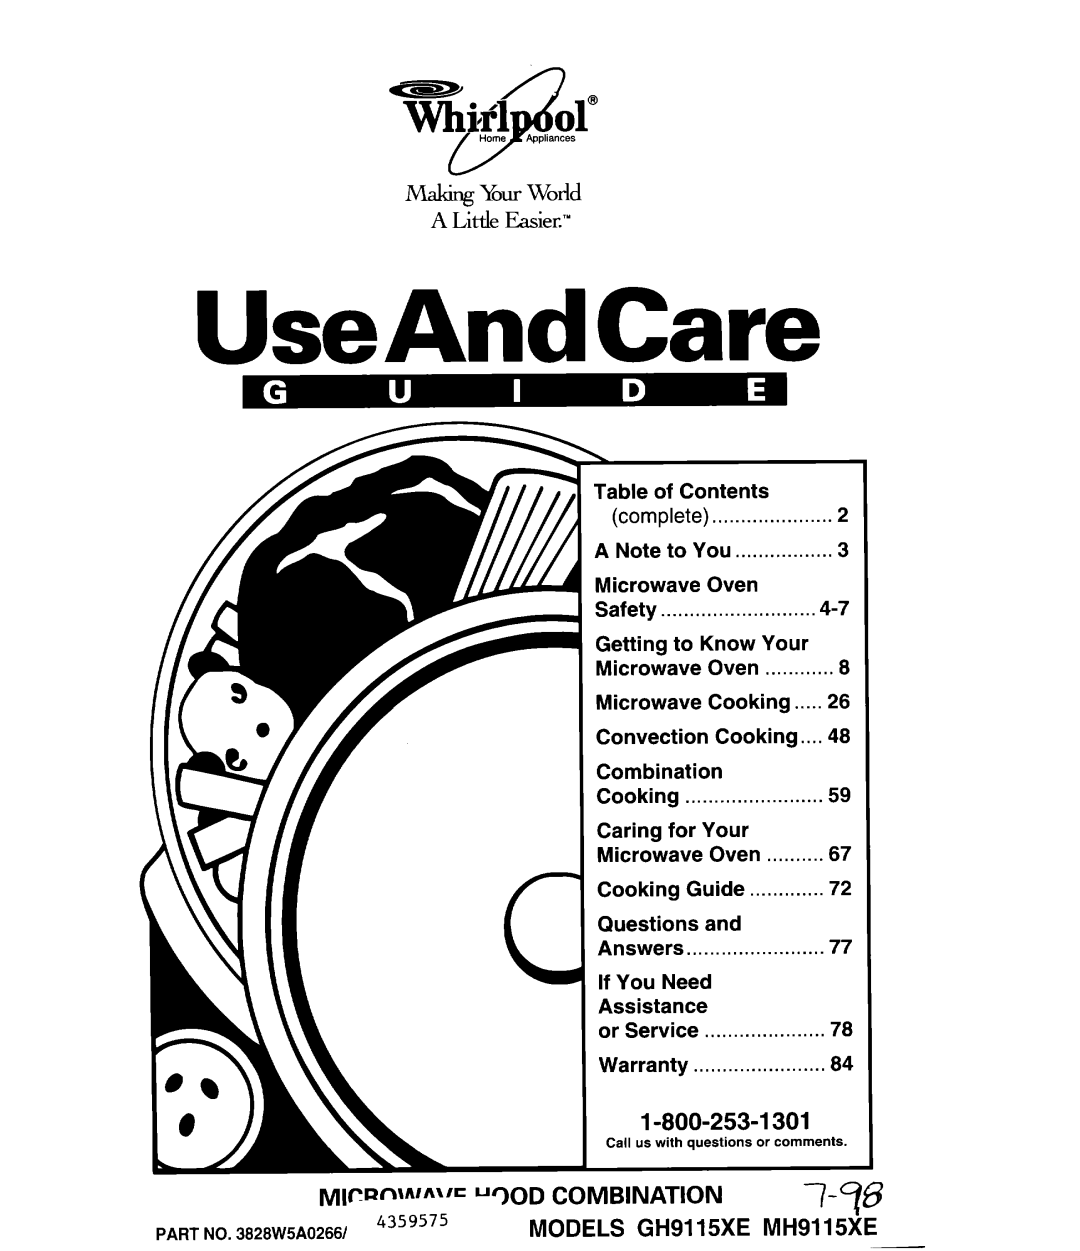 Whirlpool warranty 1-800-253-I301, Mlc’-‘*““‘=“30D COMBINATION 7-q8, MODELS GH9115XE, UseAndCare, A Little E!asiec’” 